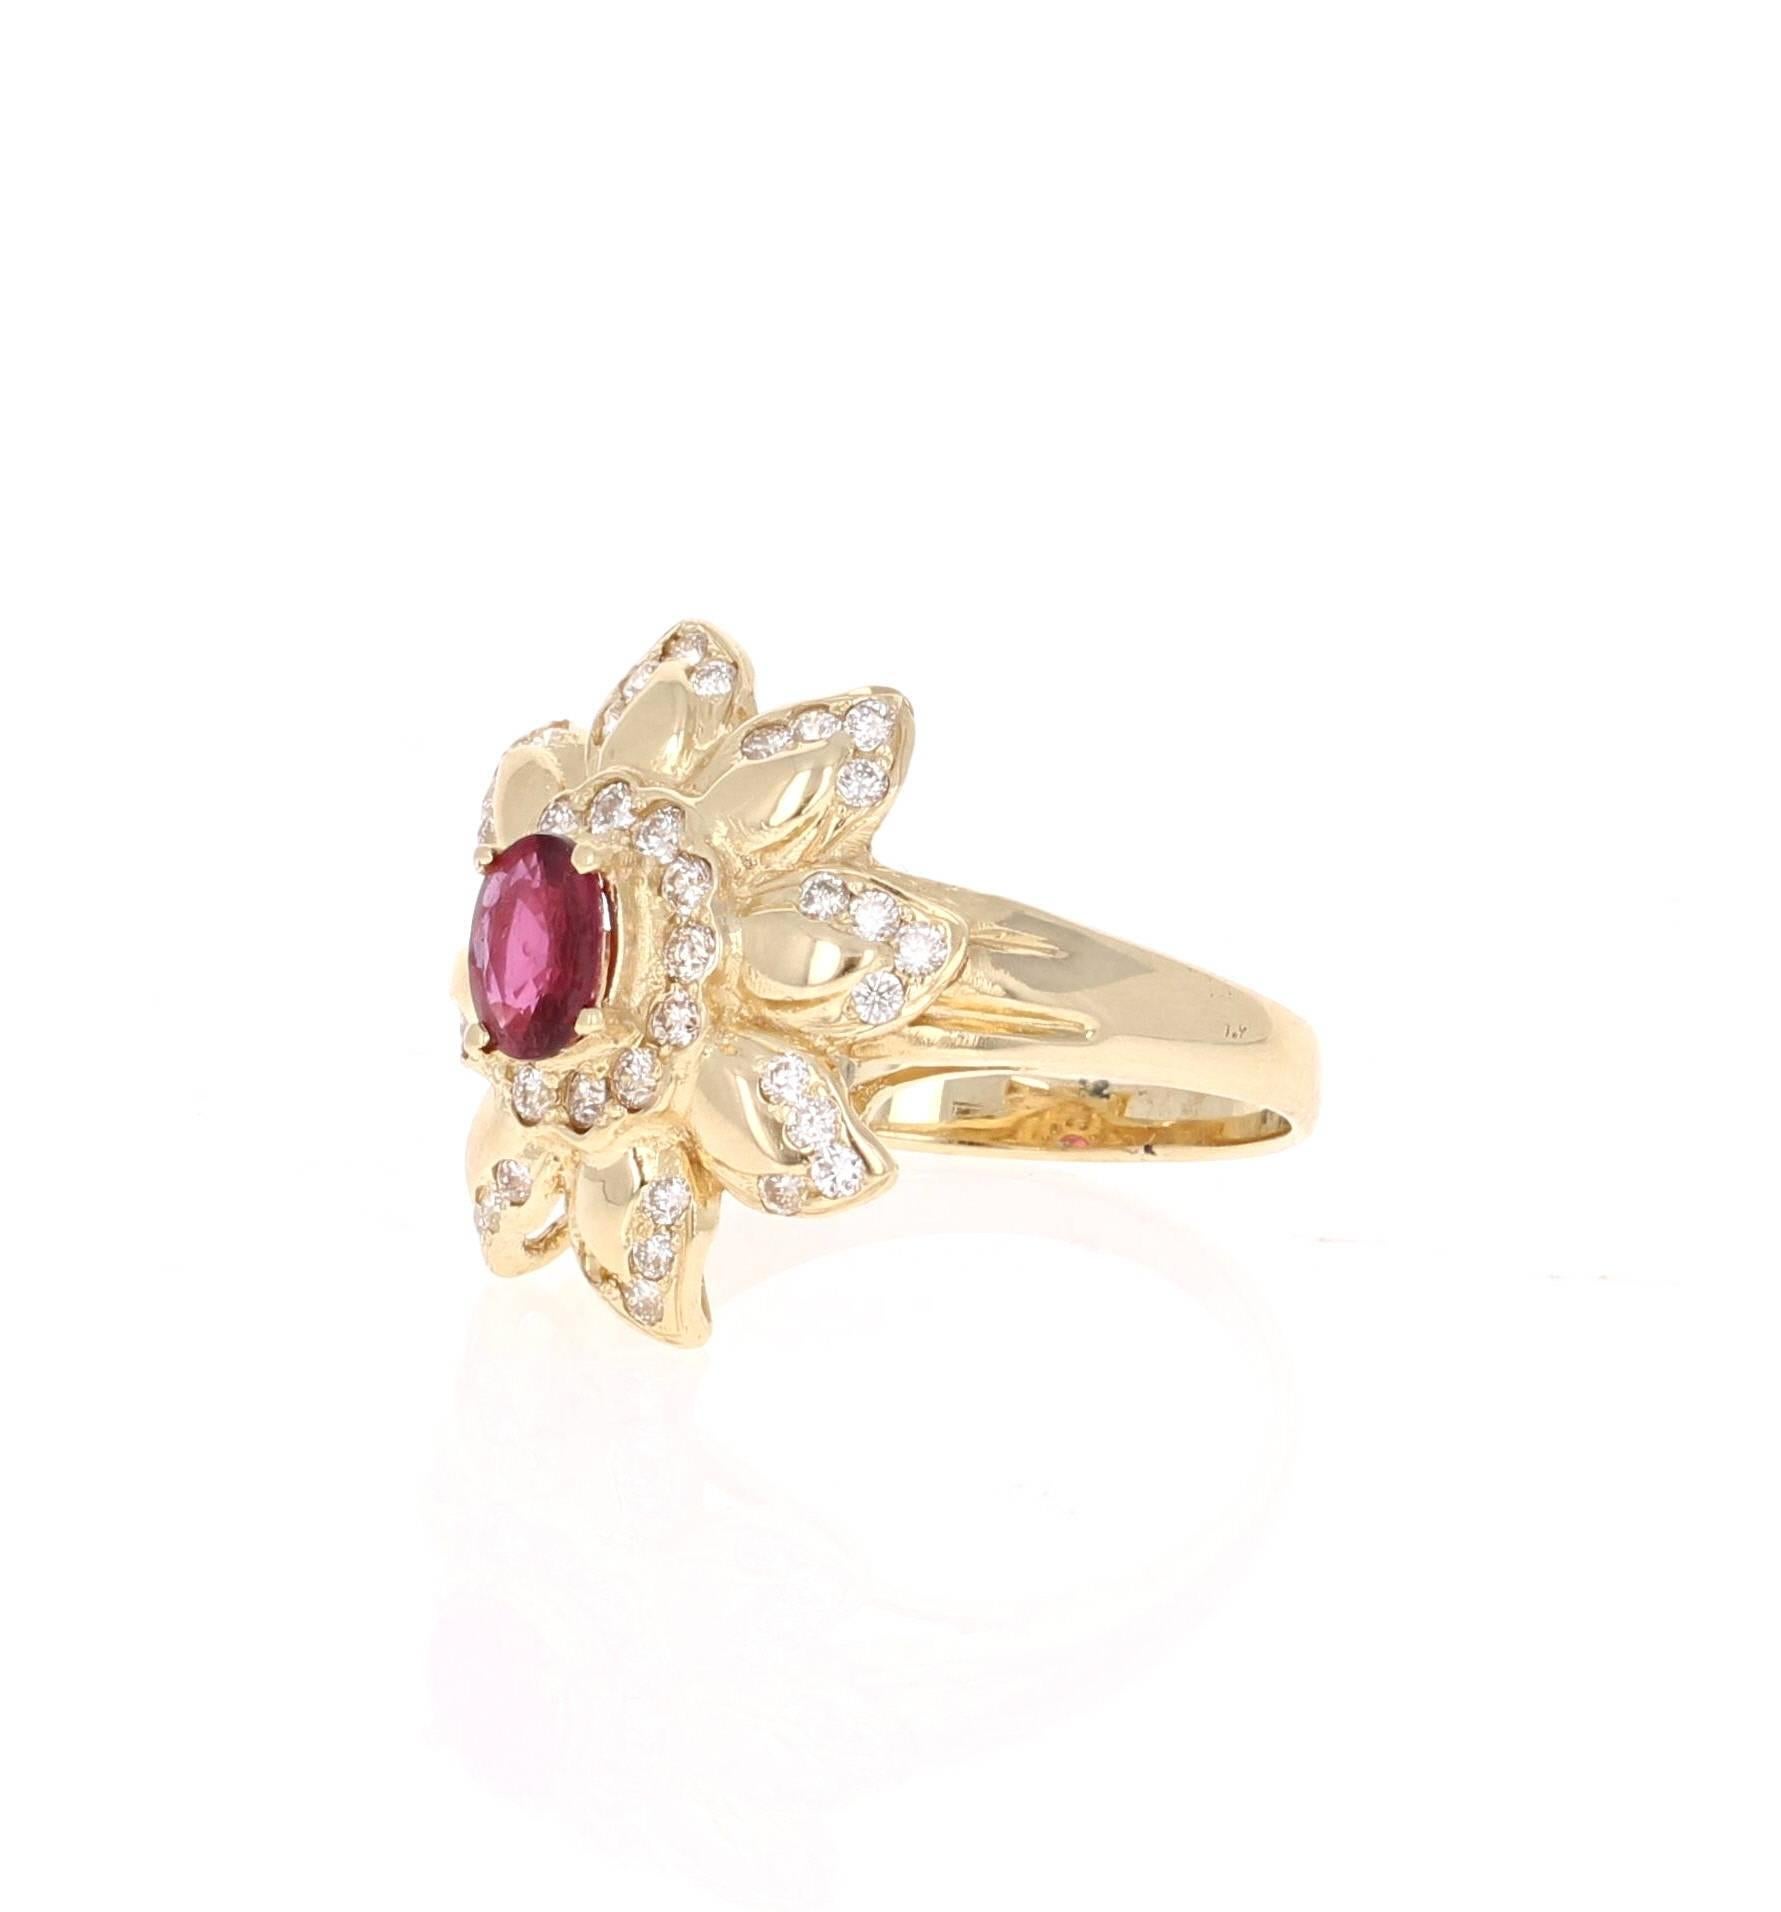 Contemporary 1.20 Carat Ruby Diamond 14 Karat Yellow Gold Cocktail Ring For Sale